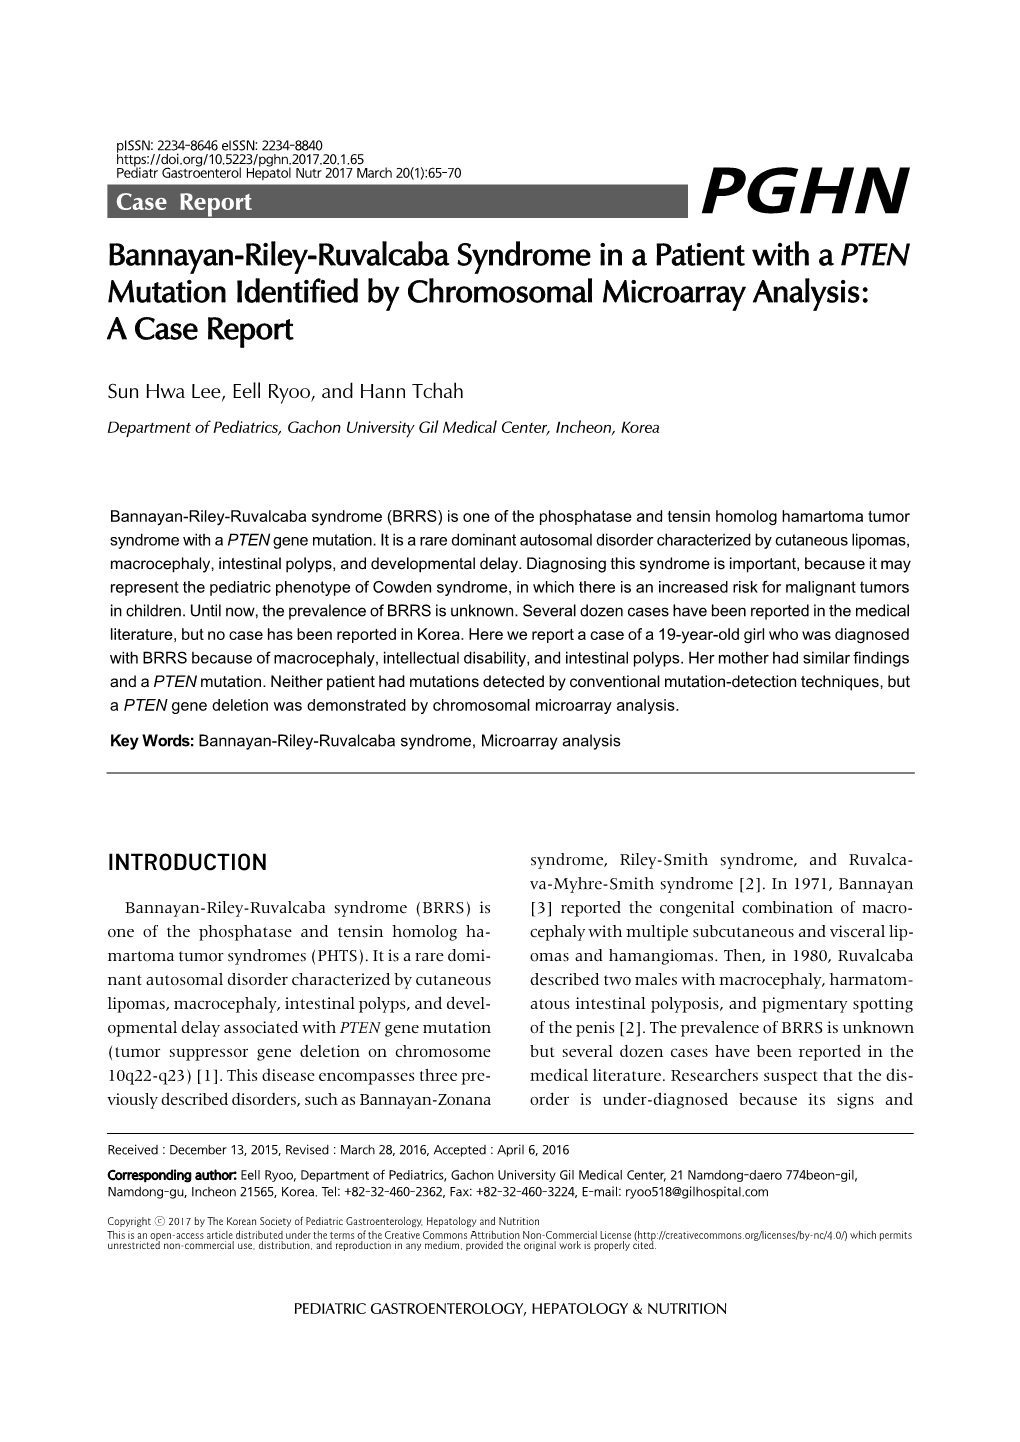 Bannayan-Riley-Ruvalcaba Syndrome in a Patient with a PTEN Mutation Identified by Chromosomal Microarray Analysis: a Case Report